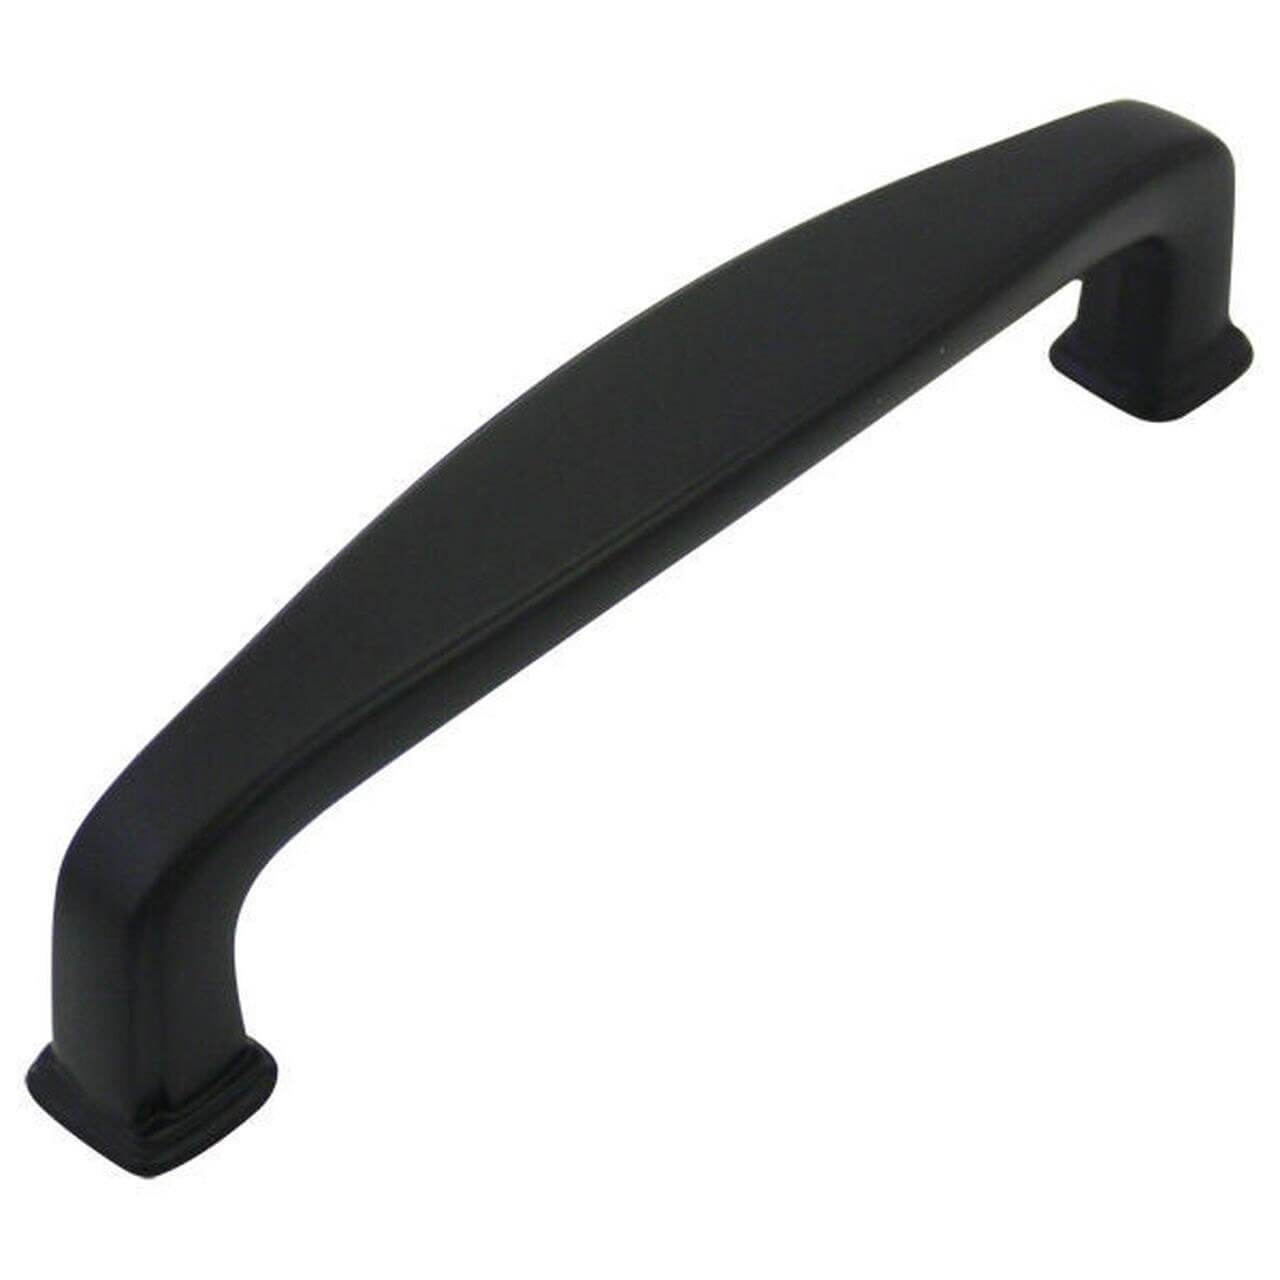 Flat black drawer pull with three inch hole spacing